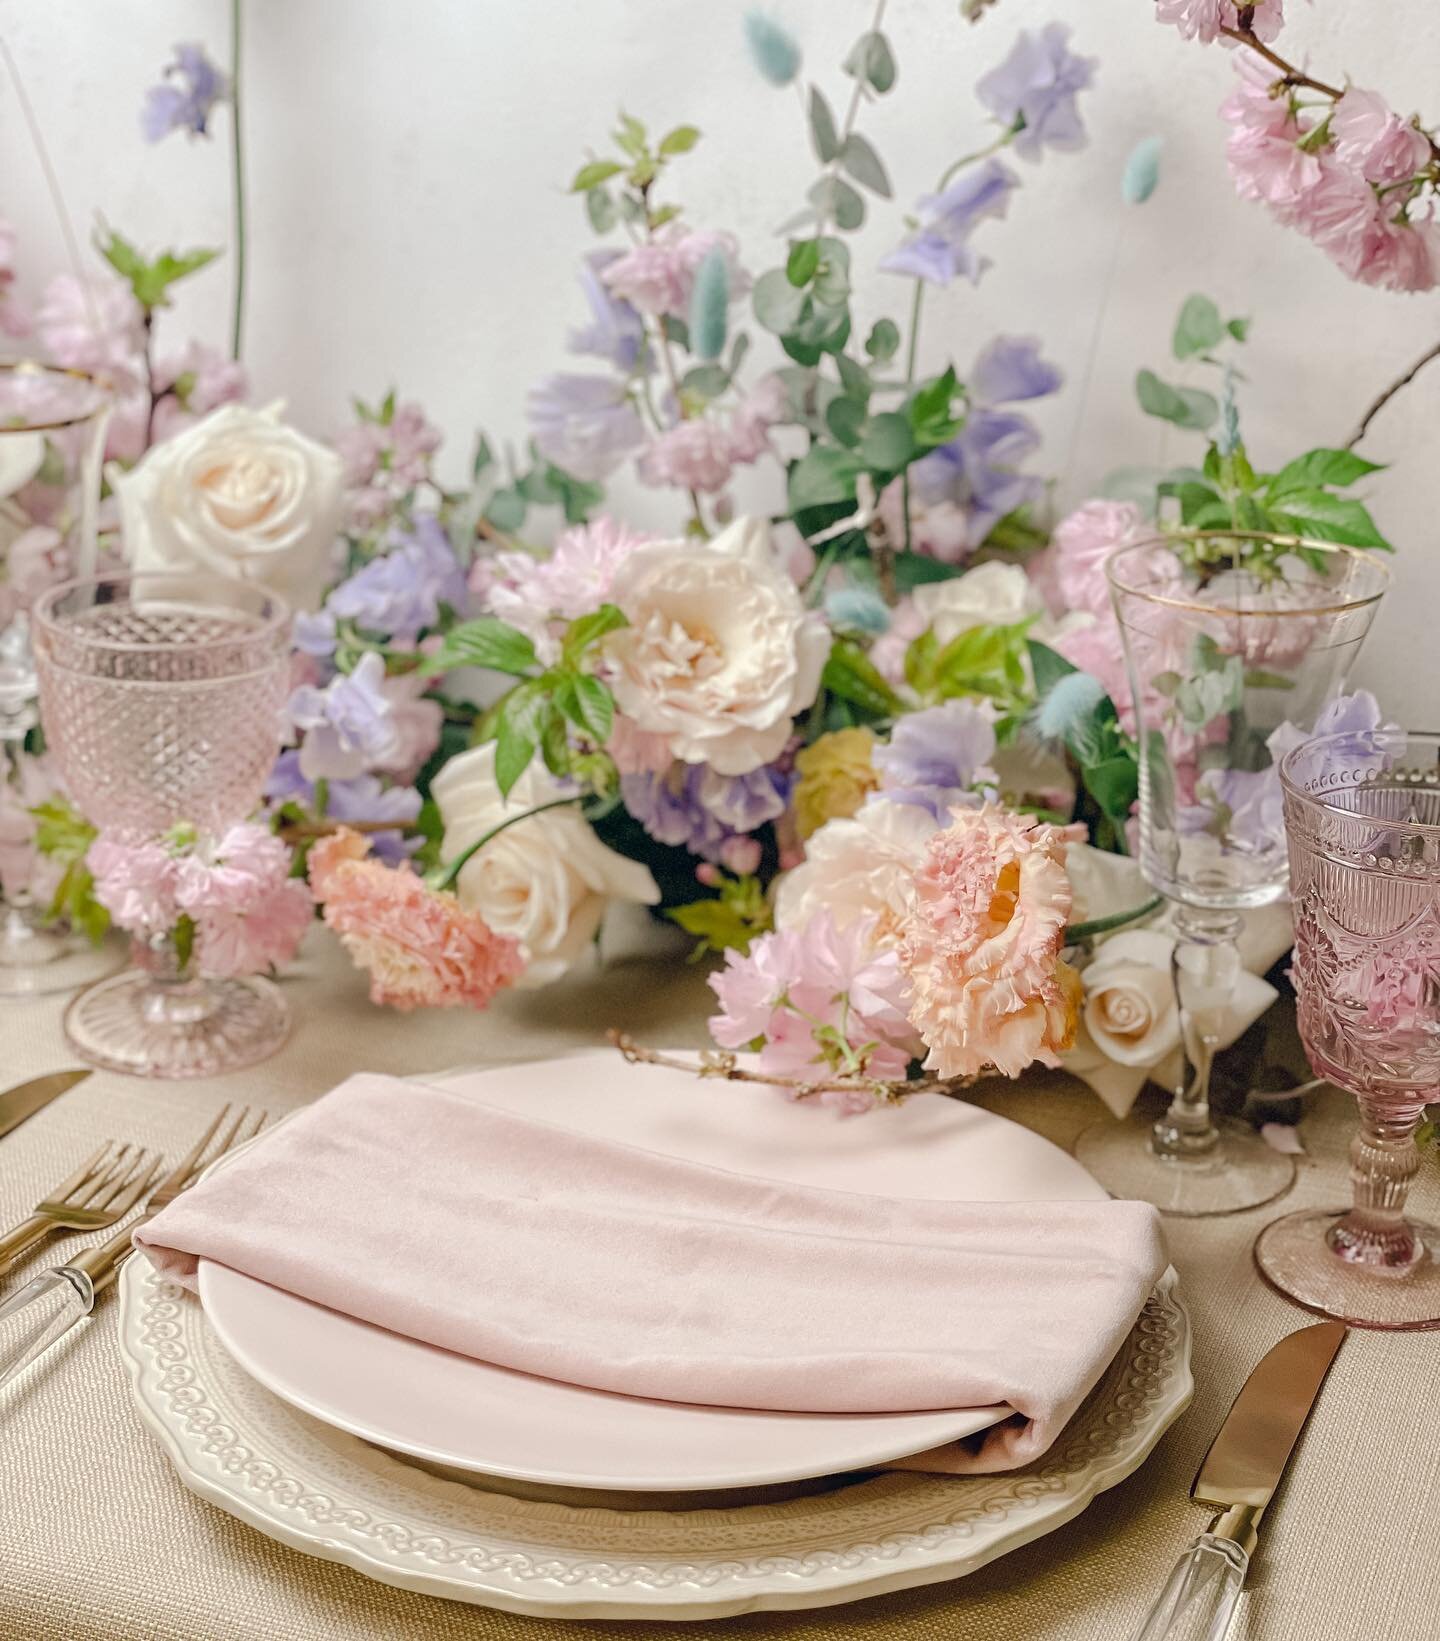 h a p p y  E A S T E R 🌸

all the pretty pastels by @florist.song featuring gold rim glassware, vintage pink goblets, esme lace charger, arlo blush dinnerware, liv acrylic flatware and velvet blush napkin.

ALL AVAILABLE FOR RENT AT
www.tabletalkren